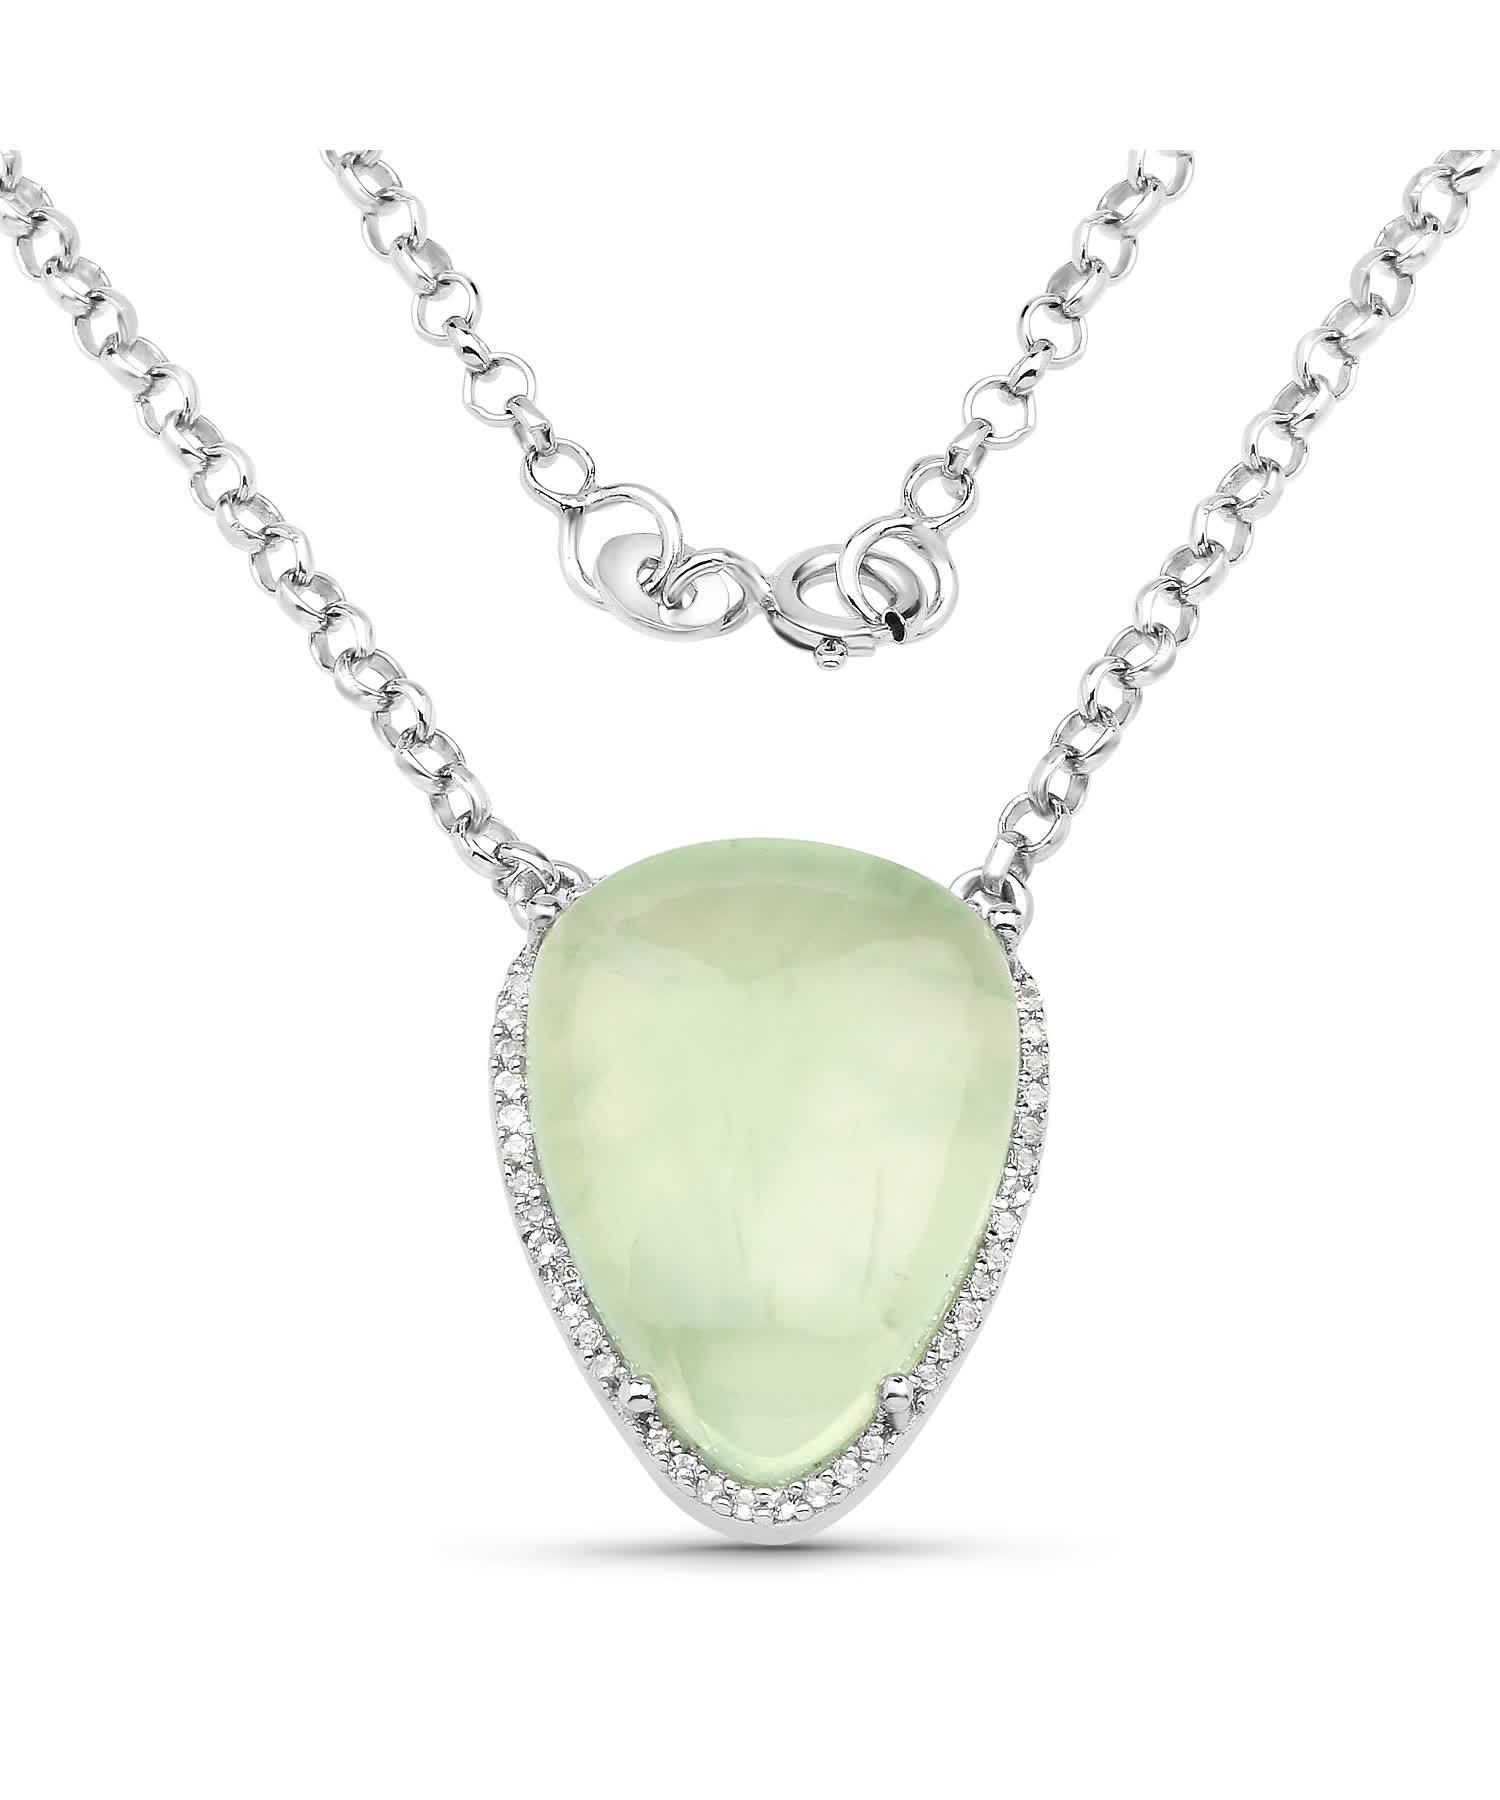 10.77ctw Natural Prehnite and Topaz Rhodium Plated 925 Sterling Silver Drop Necklace View 1